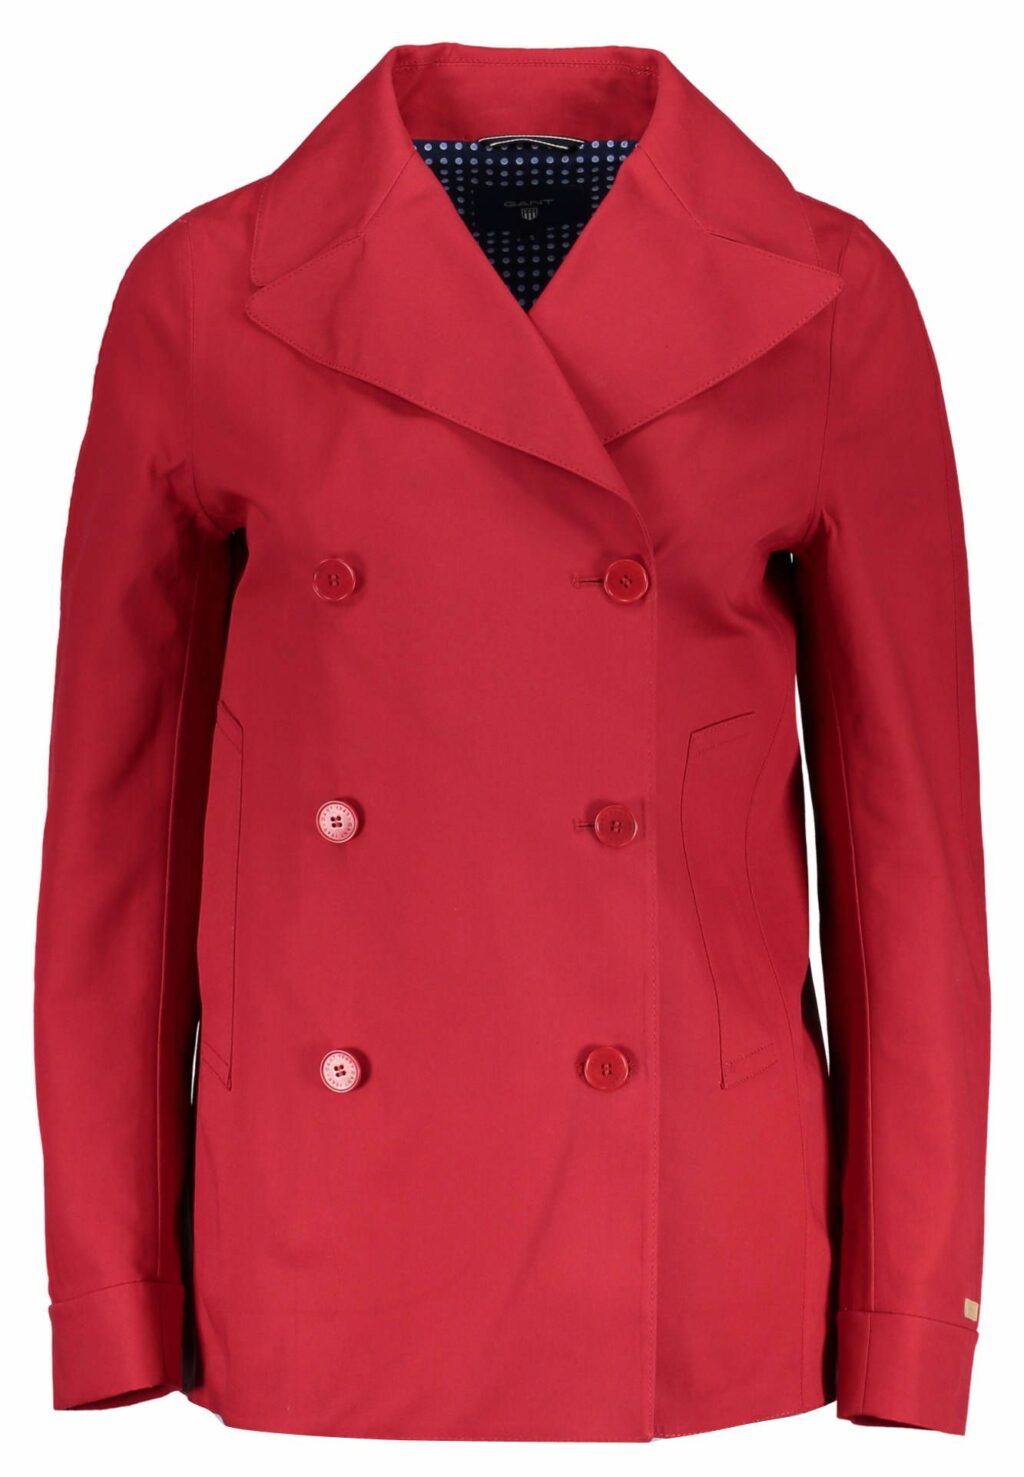 GANT WOMEN'S SPORTS JACKET RED 1601475710_CAE7C2E_ROSSO610